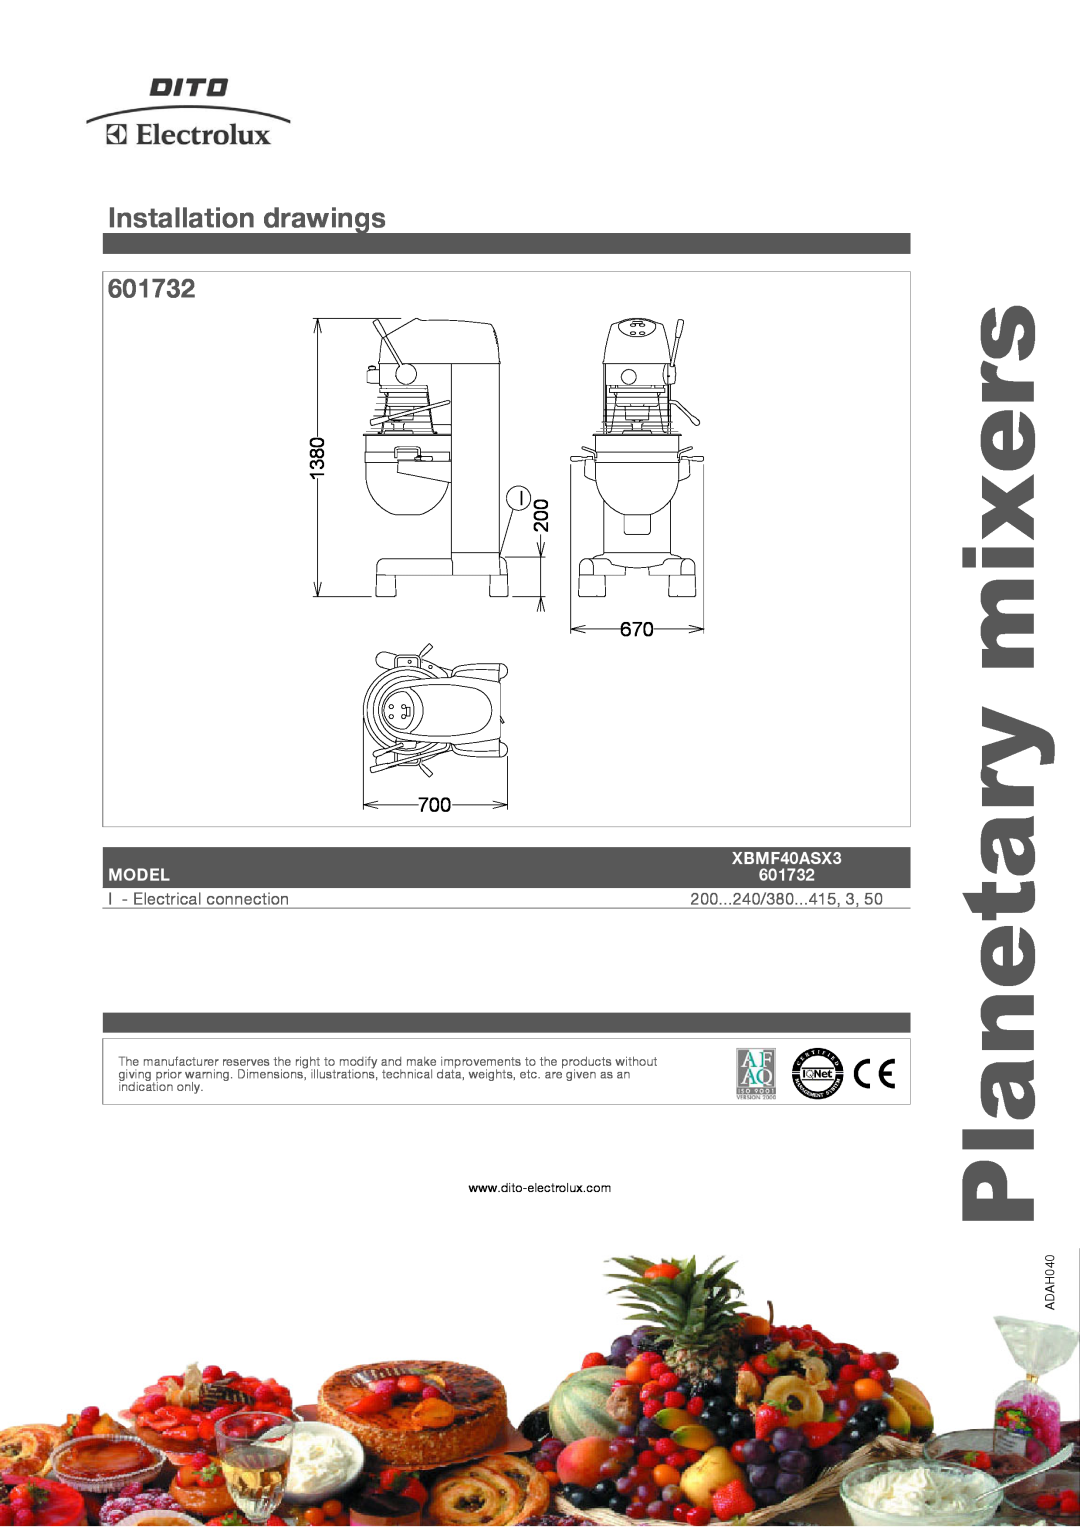 Electrolux XBMF40ASX3 Installation drawings, Planetary mixers, 601732, 1380, Model, I - Electrical connection, ADAH040 